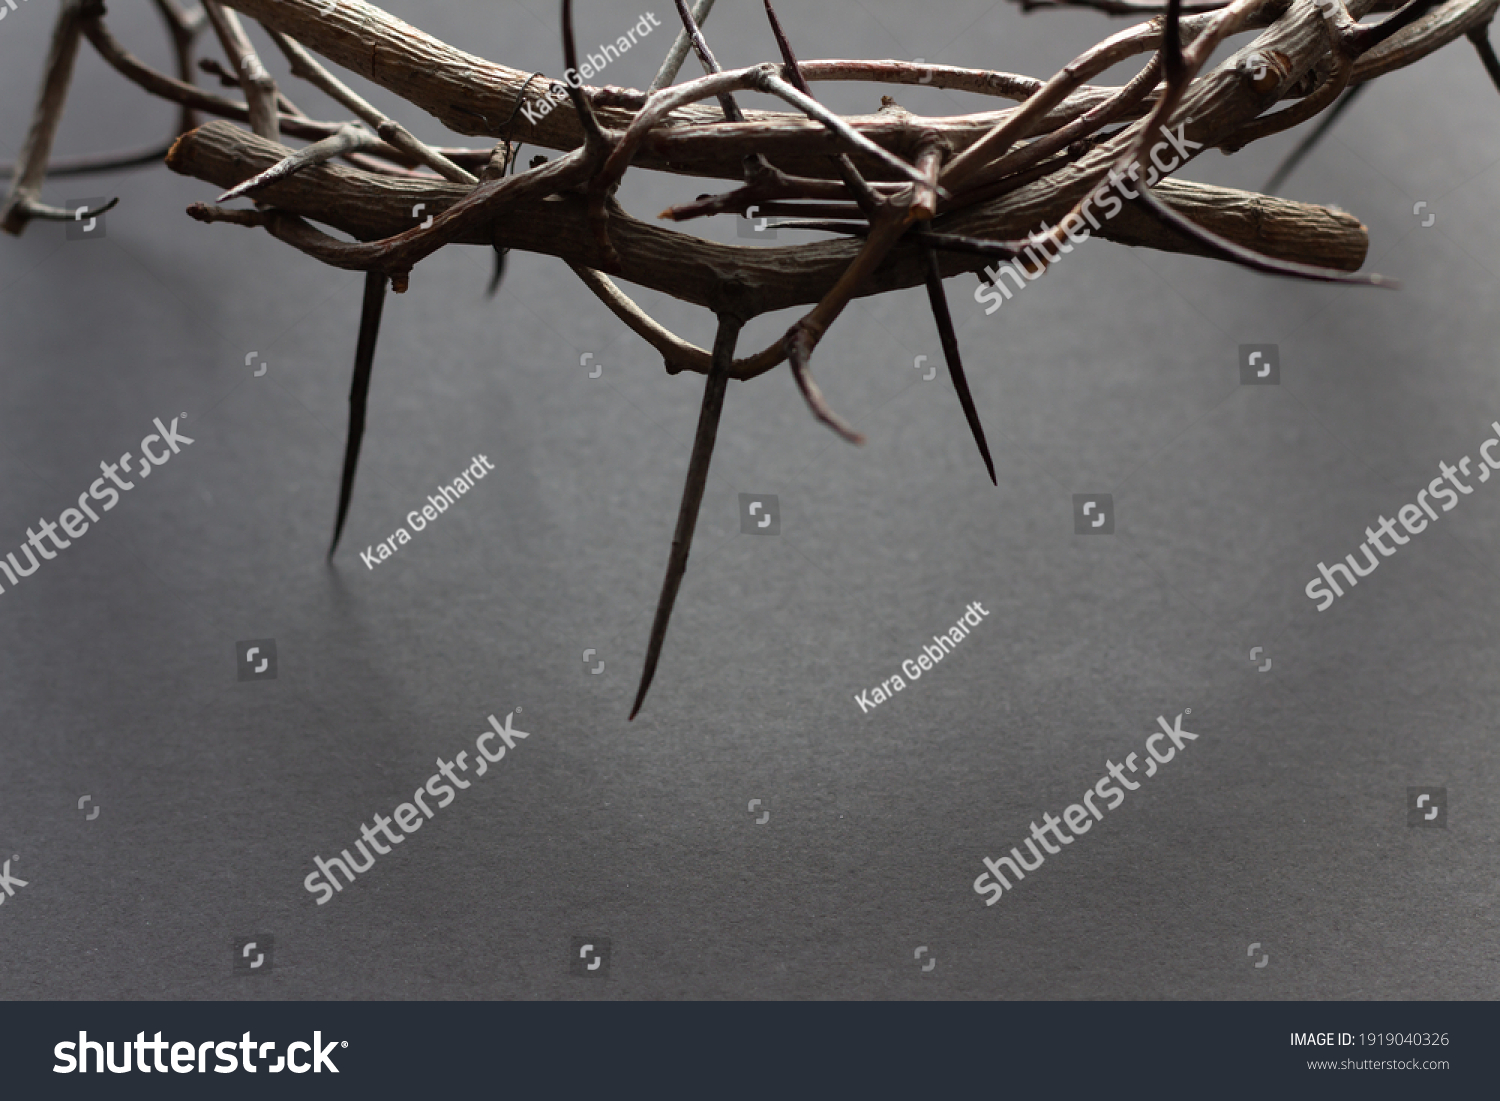 Edge of crown of thorns with copy space on black background #1919040326